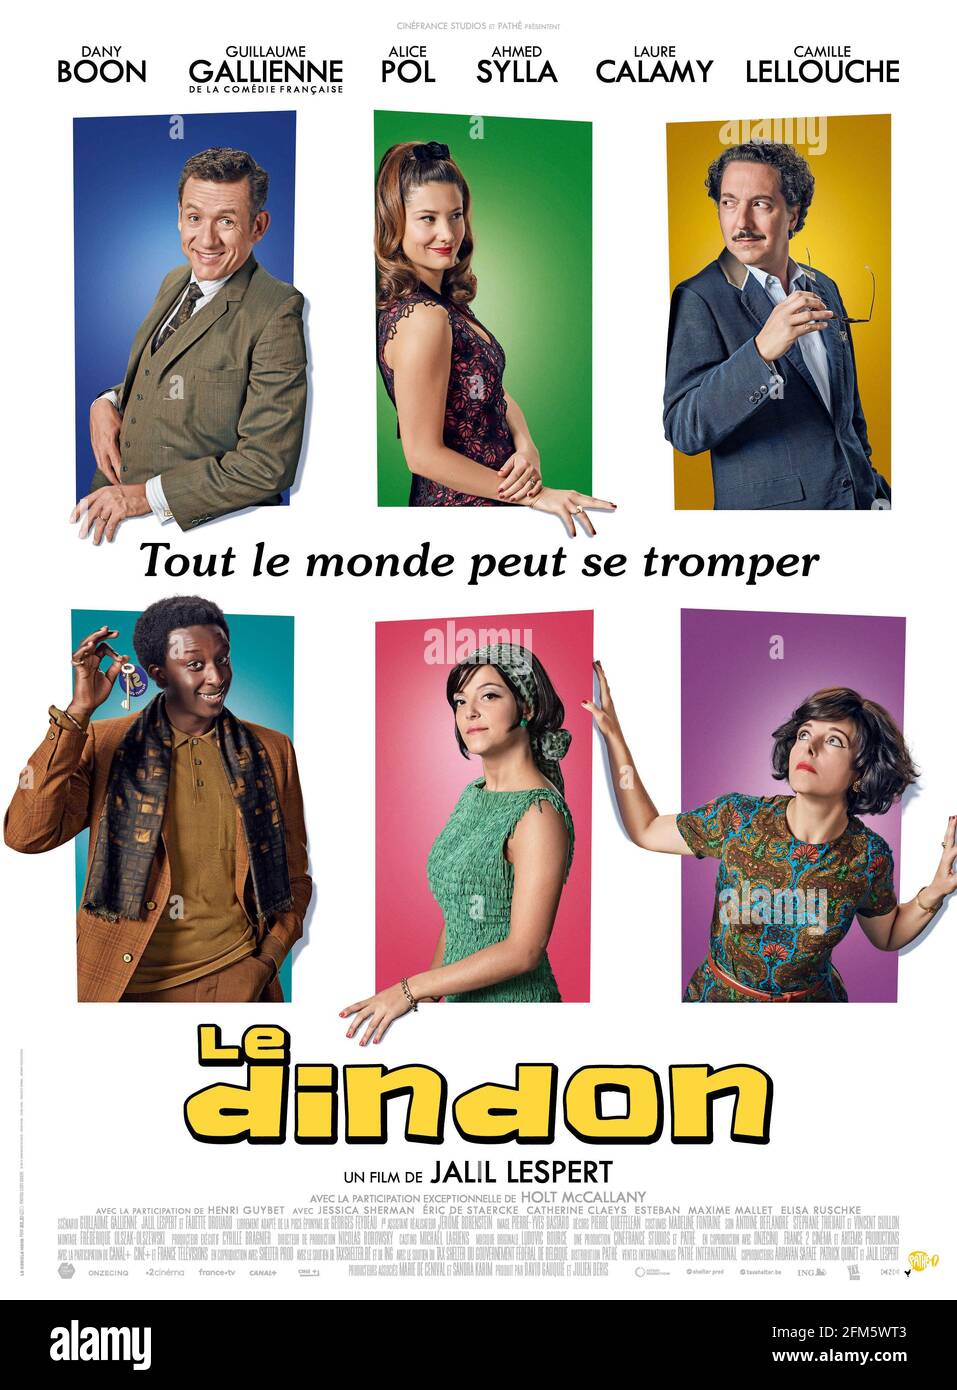 DANY BOON and GUILLAUME GALLIENNE in THE FOOL (2019) -Original title: LE DINDON-, directed by JALIL LESPERT. Credit: Cinéfrance Studios / Pathé / Album Stock Photo